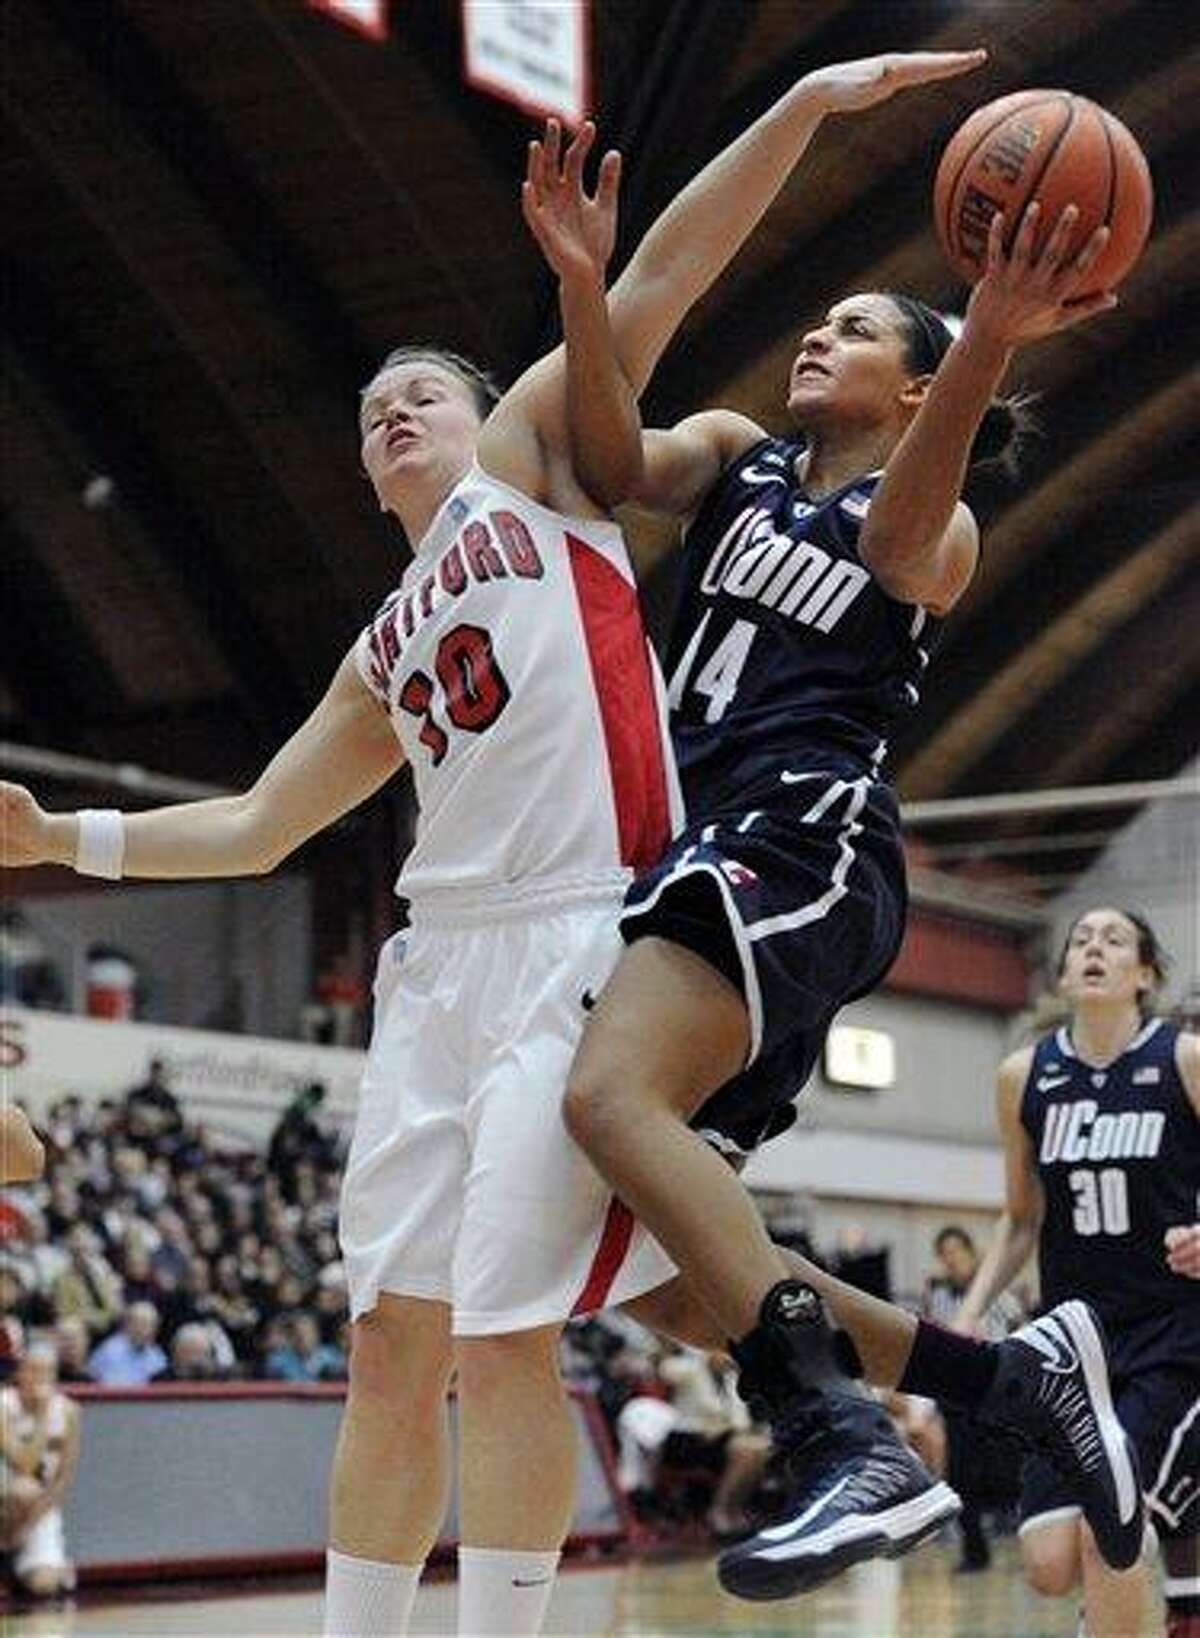 Connecticut's Bria Hartley, right is fouled by Hartford's Alex Hall, left, during the first half of an NCAA women's college basketball game at the Hartford, Saturday, Dec. 22, 2012, in West Hartford, Conn. (AP Photo/Jessica Hill)